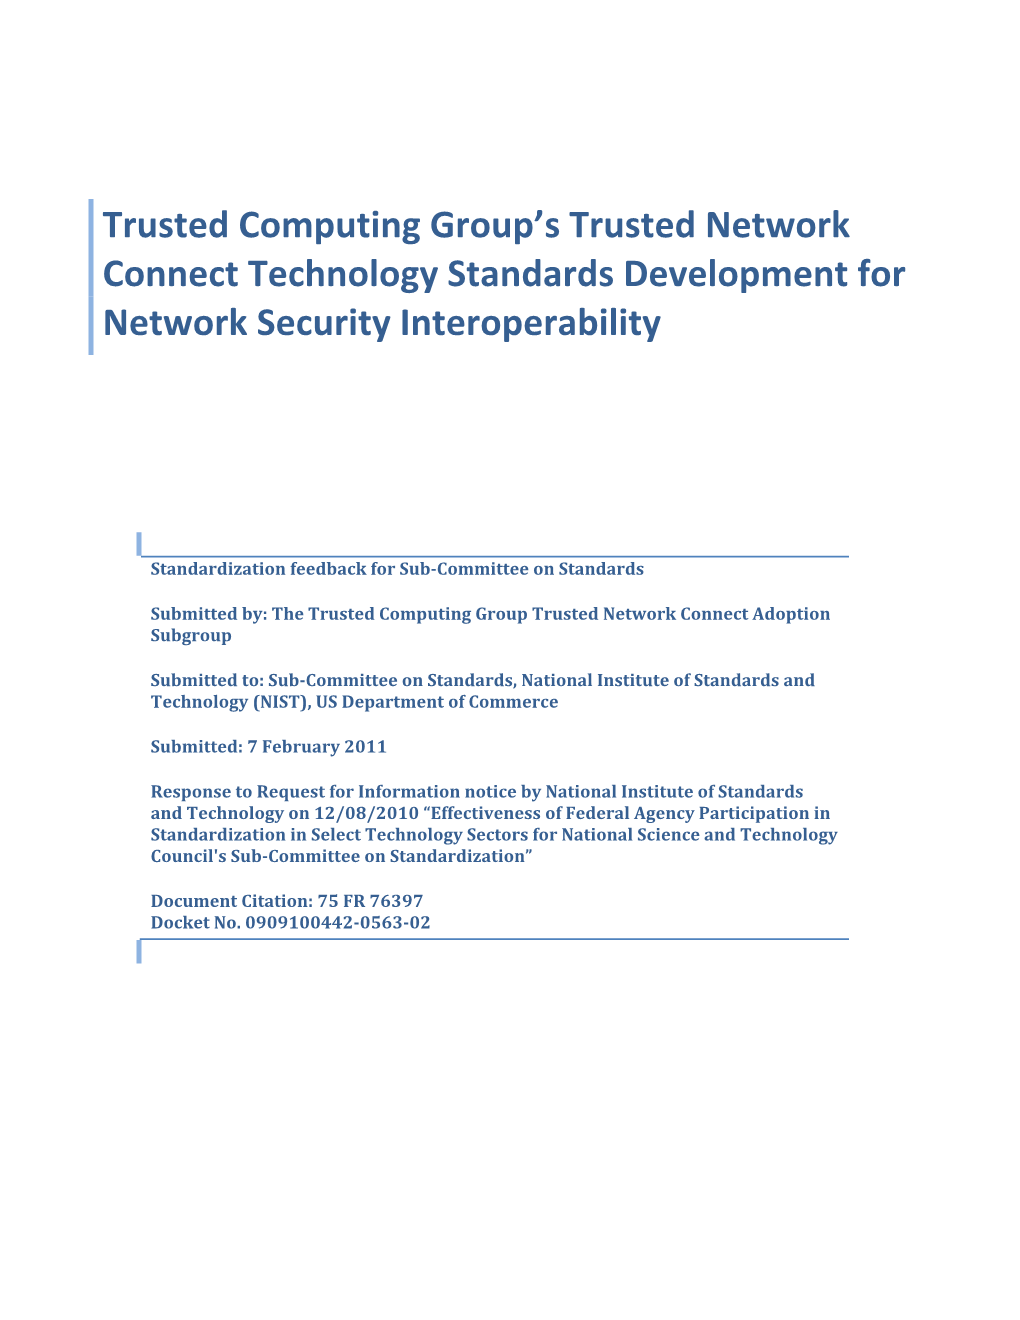 Trusted Computing Group's Trusted Network Connect Technology